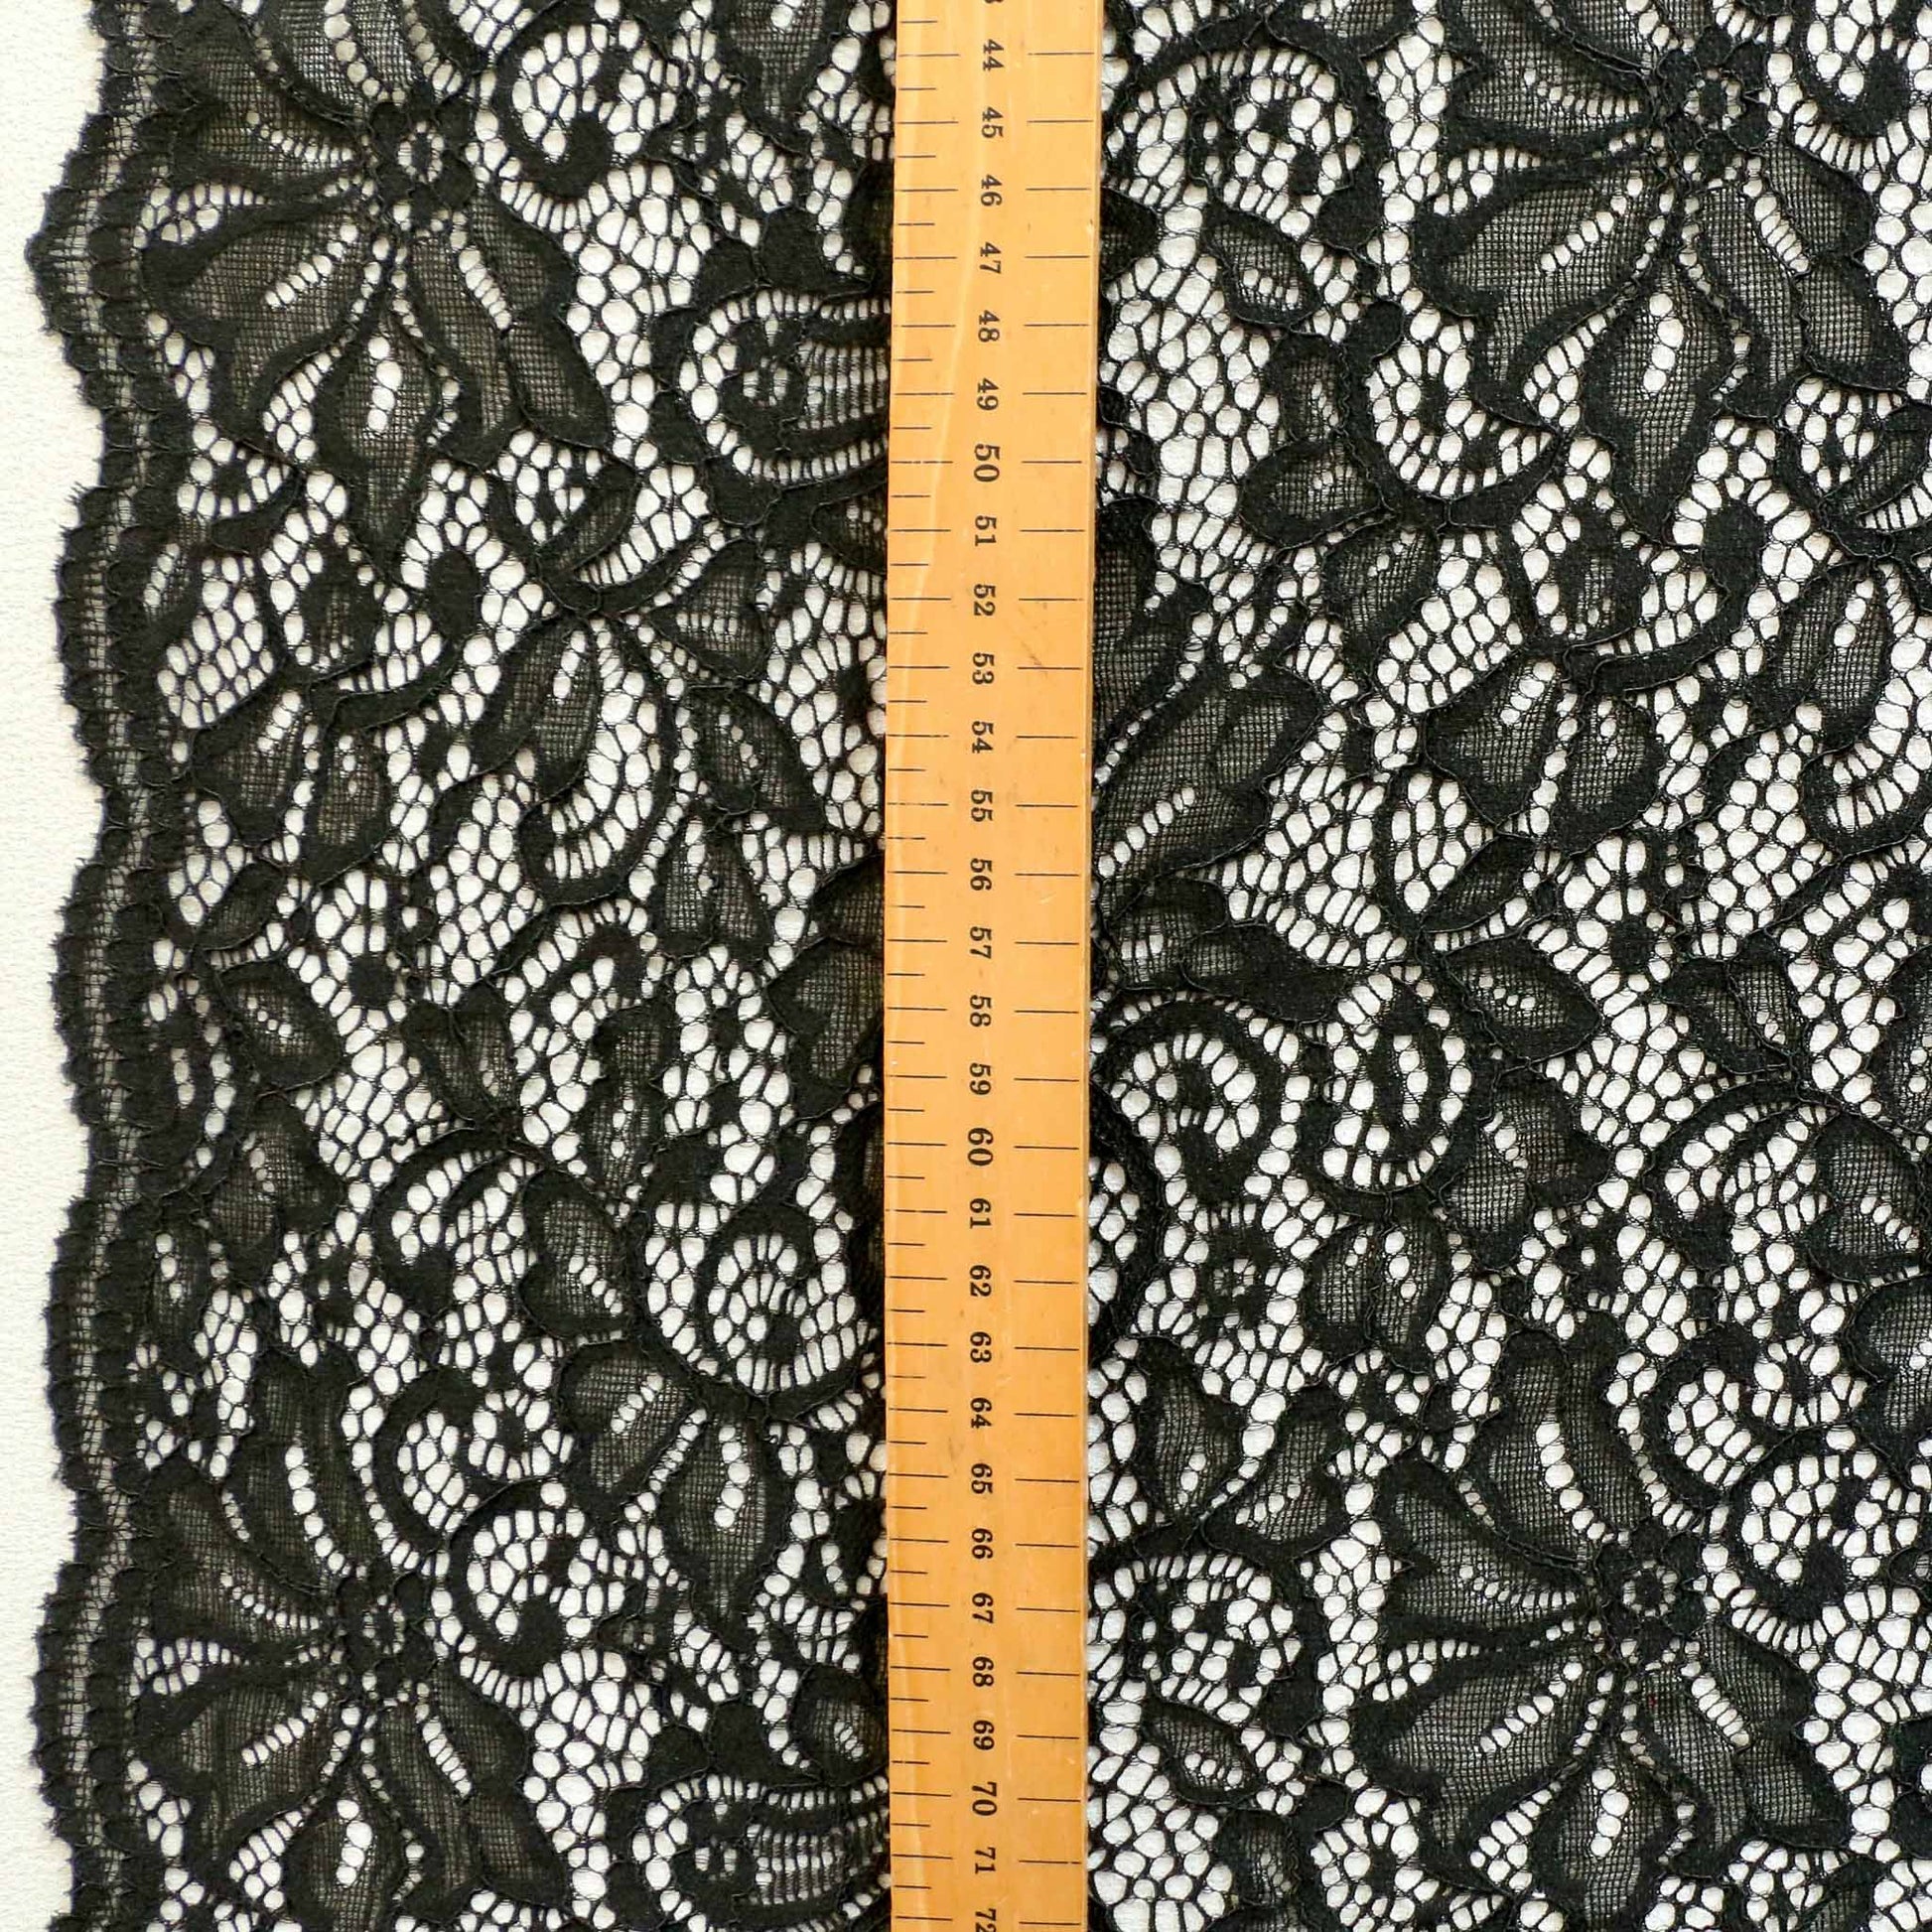 stretchy black lace dressmaking fabric with corded scalloped edge